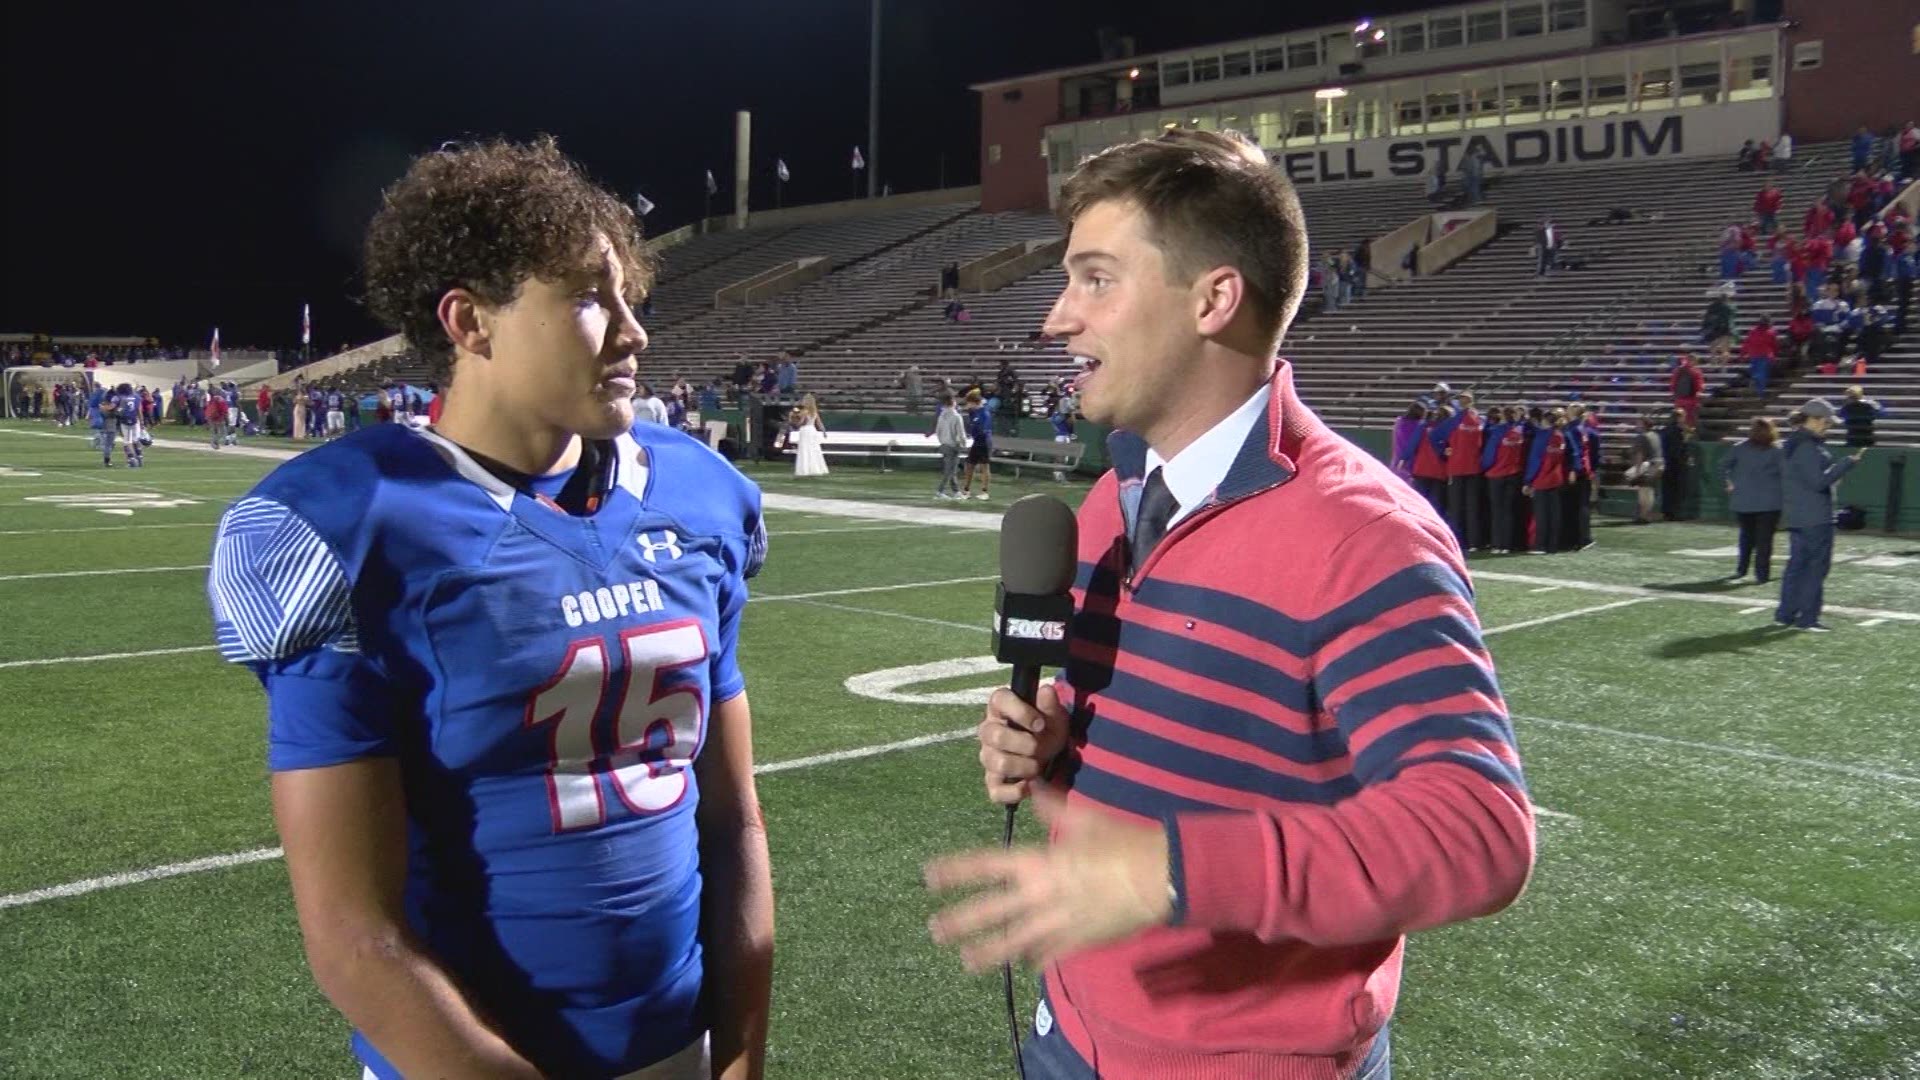 Cooper beat Amarillo Caprock 28-12 to move up to 3-1 in District play. Our Mitchel Summers caught up with Defensive Captain Dylon Davis after the game.